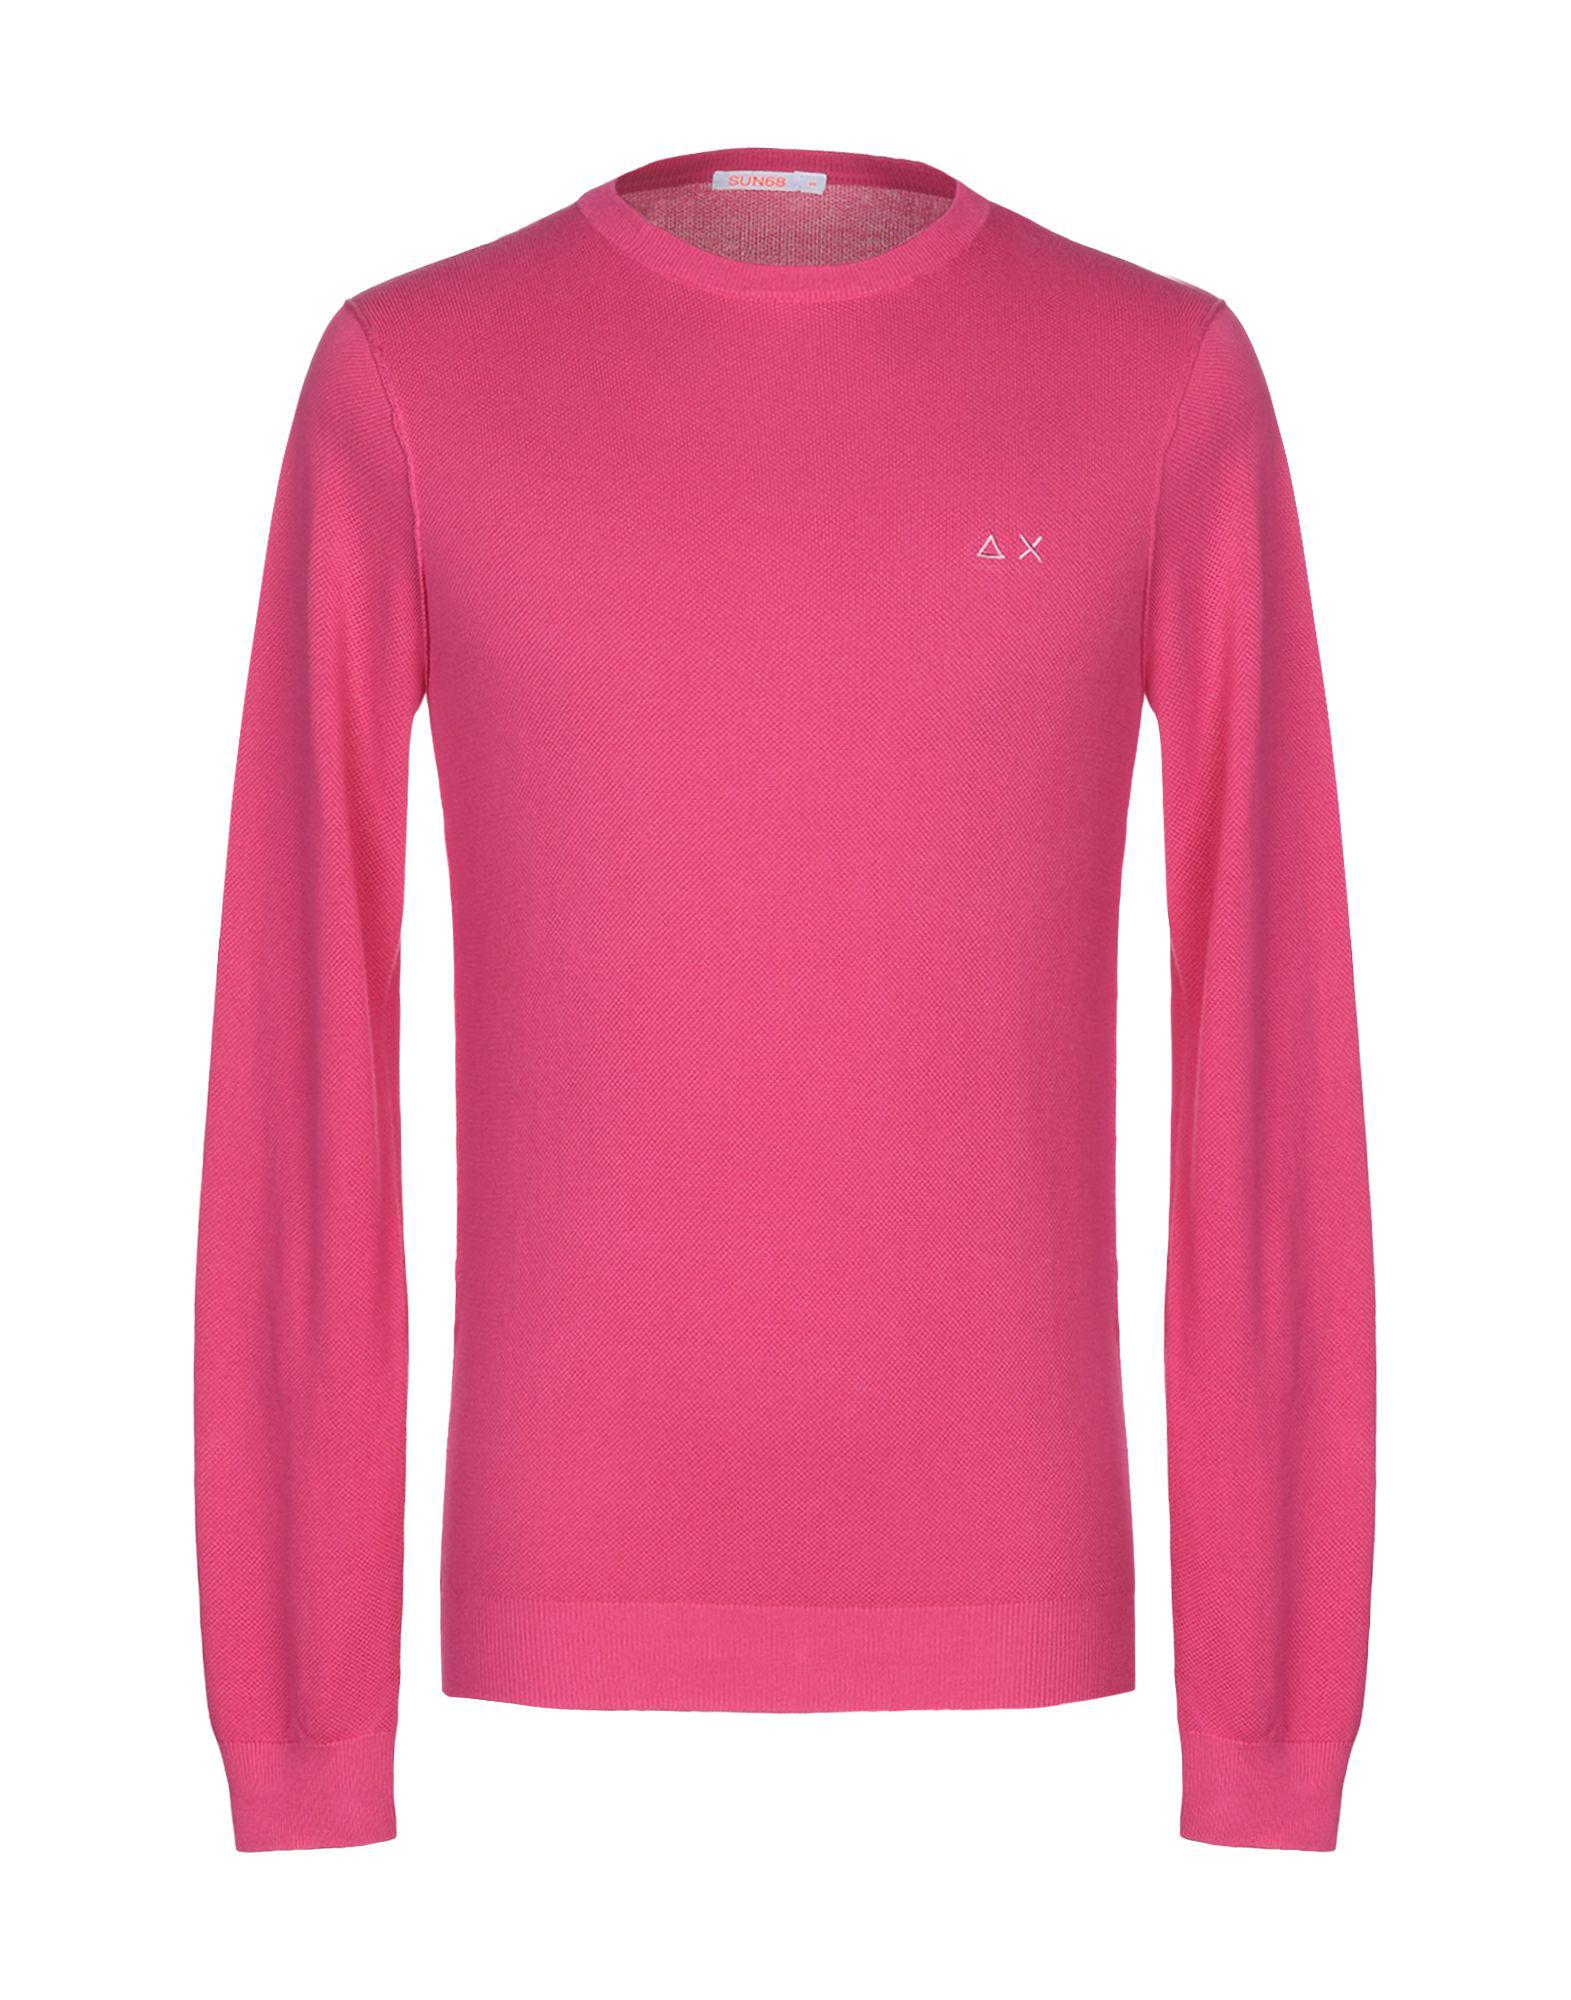 Sun 68 Sweater in Pink for Men - Lyst